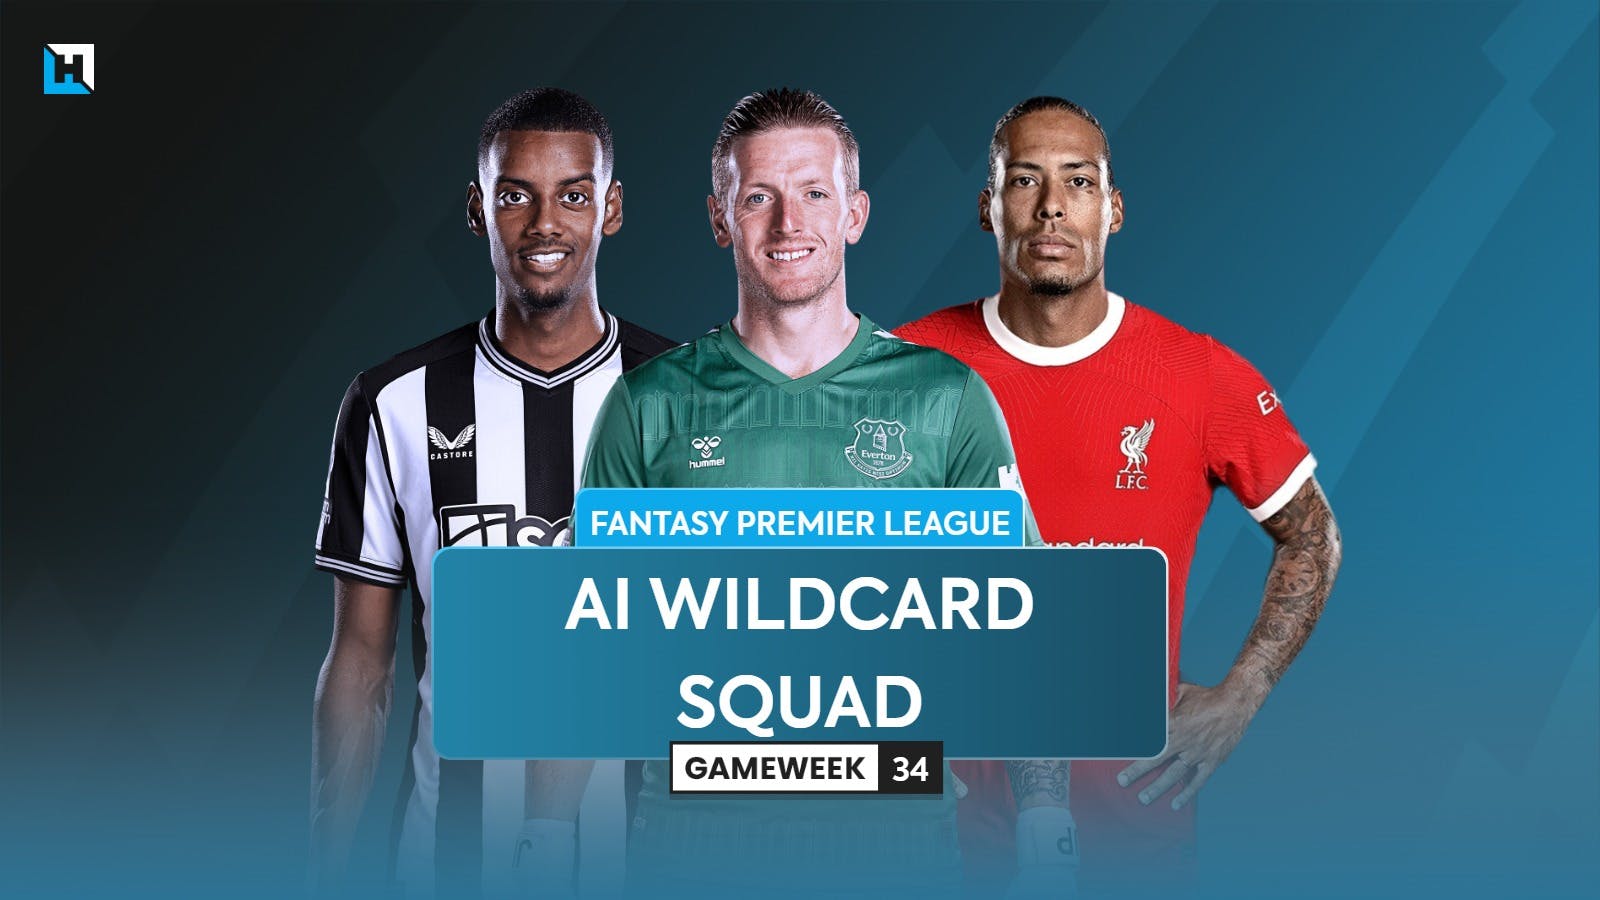 The best FPL Wildcard team for Gameweek 34 according to AI